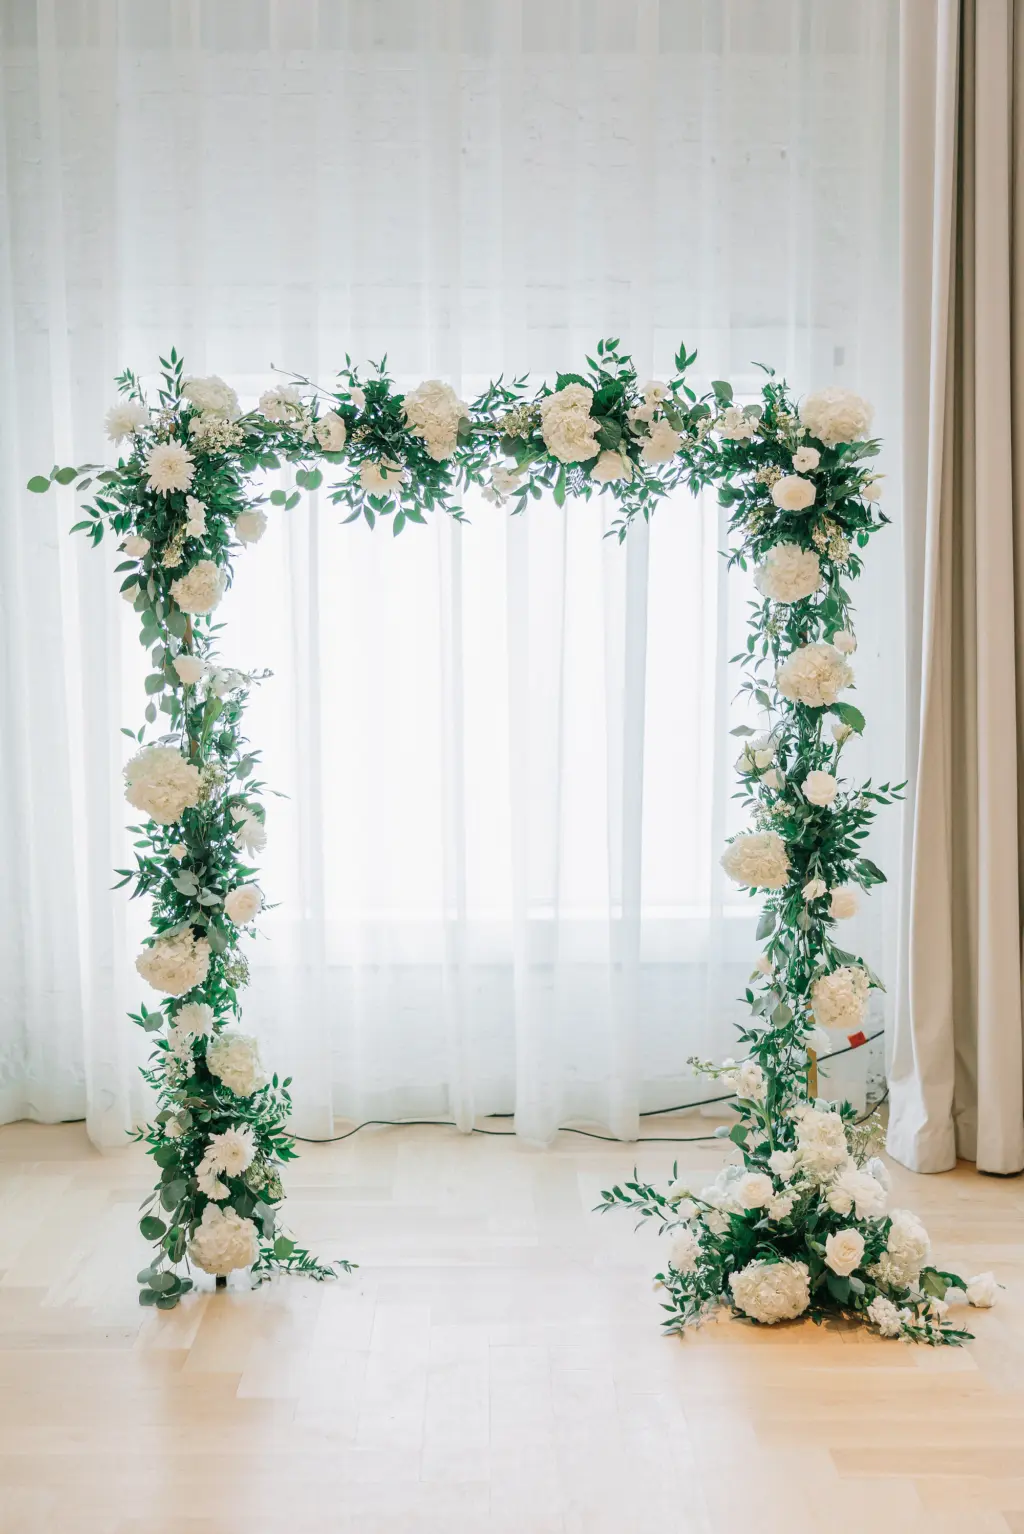 White Rose Arch with Greenery Detailing Wedding Ceremony Decoration Inspiration